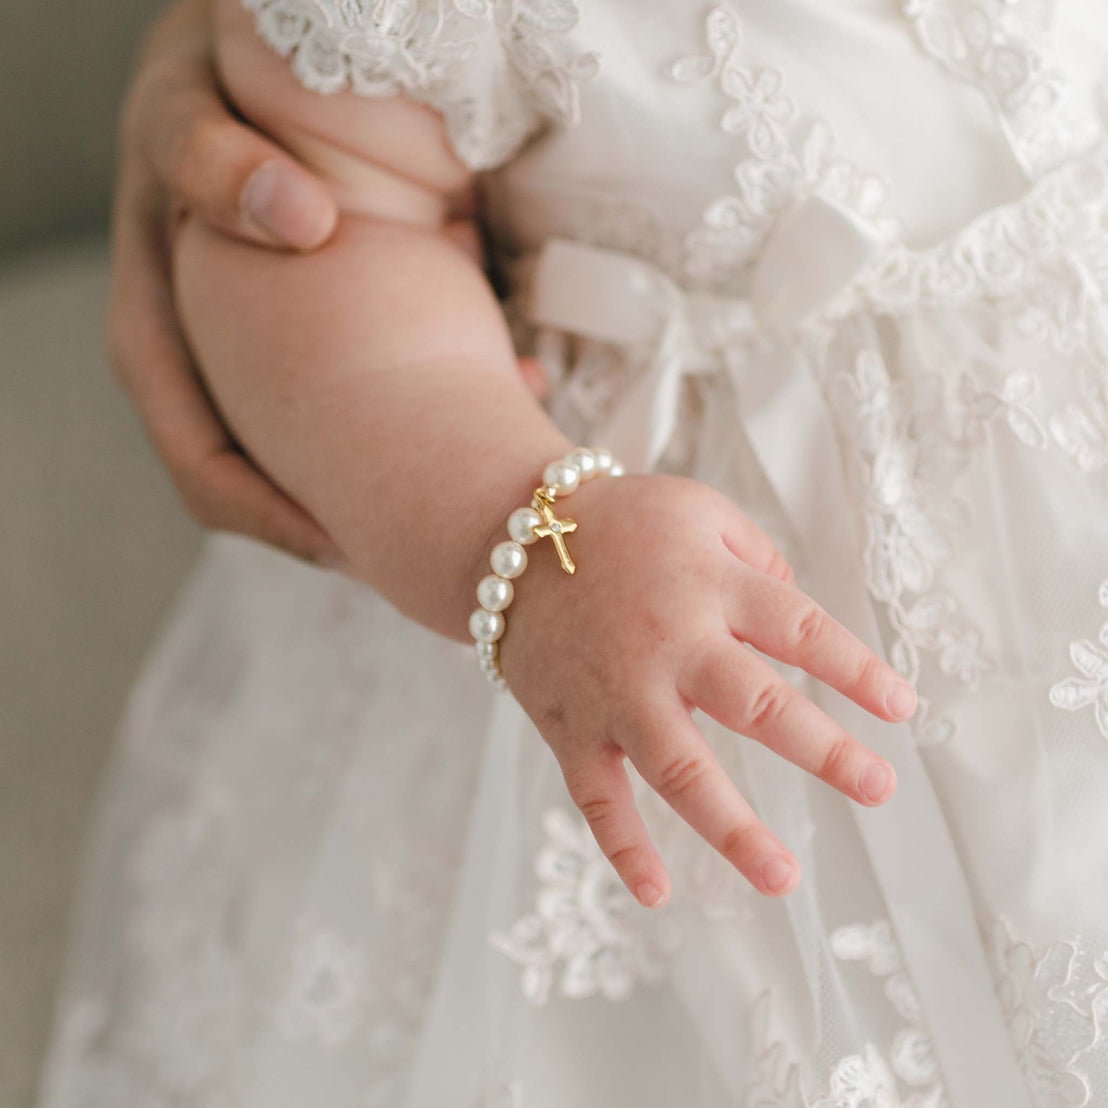 Baby girl wearing the Cream Luster Pearl Bracelet with Gold Cross. Made with cream color Swarvoski pearls, gold plated beads and gold plated clasp.